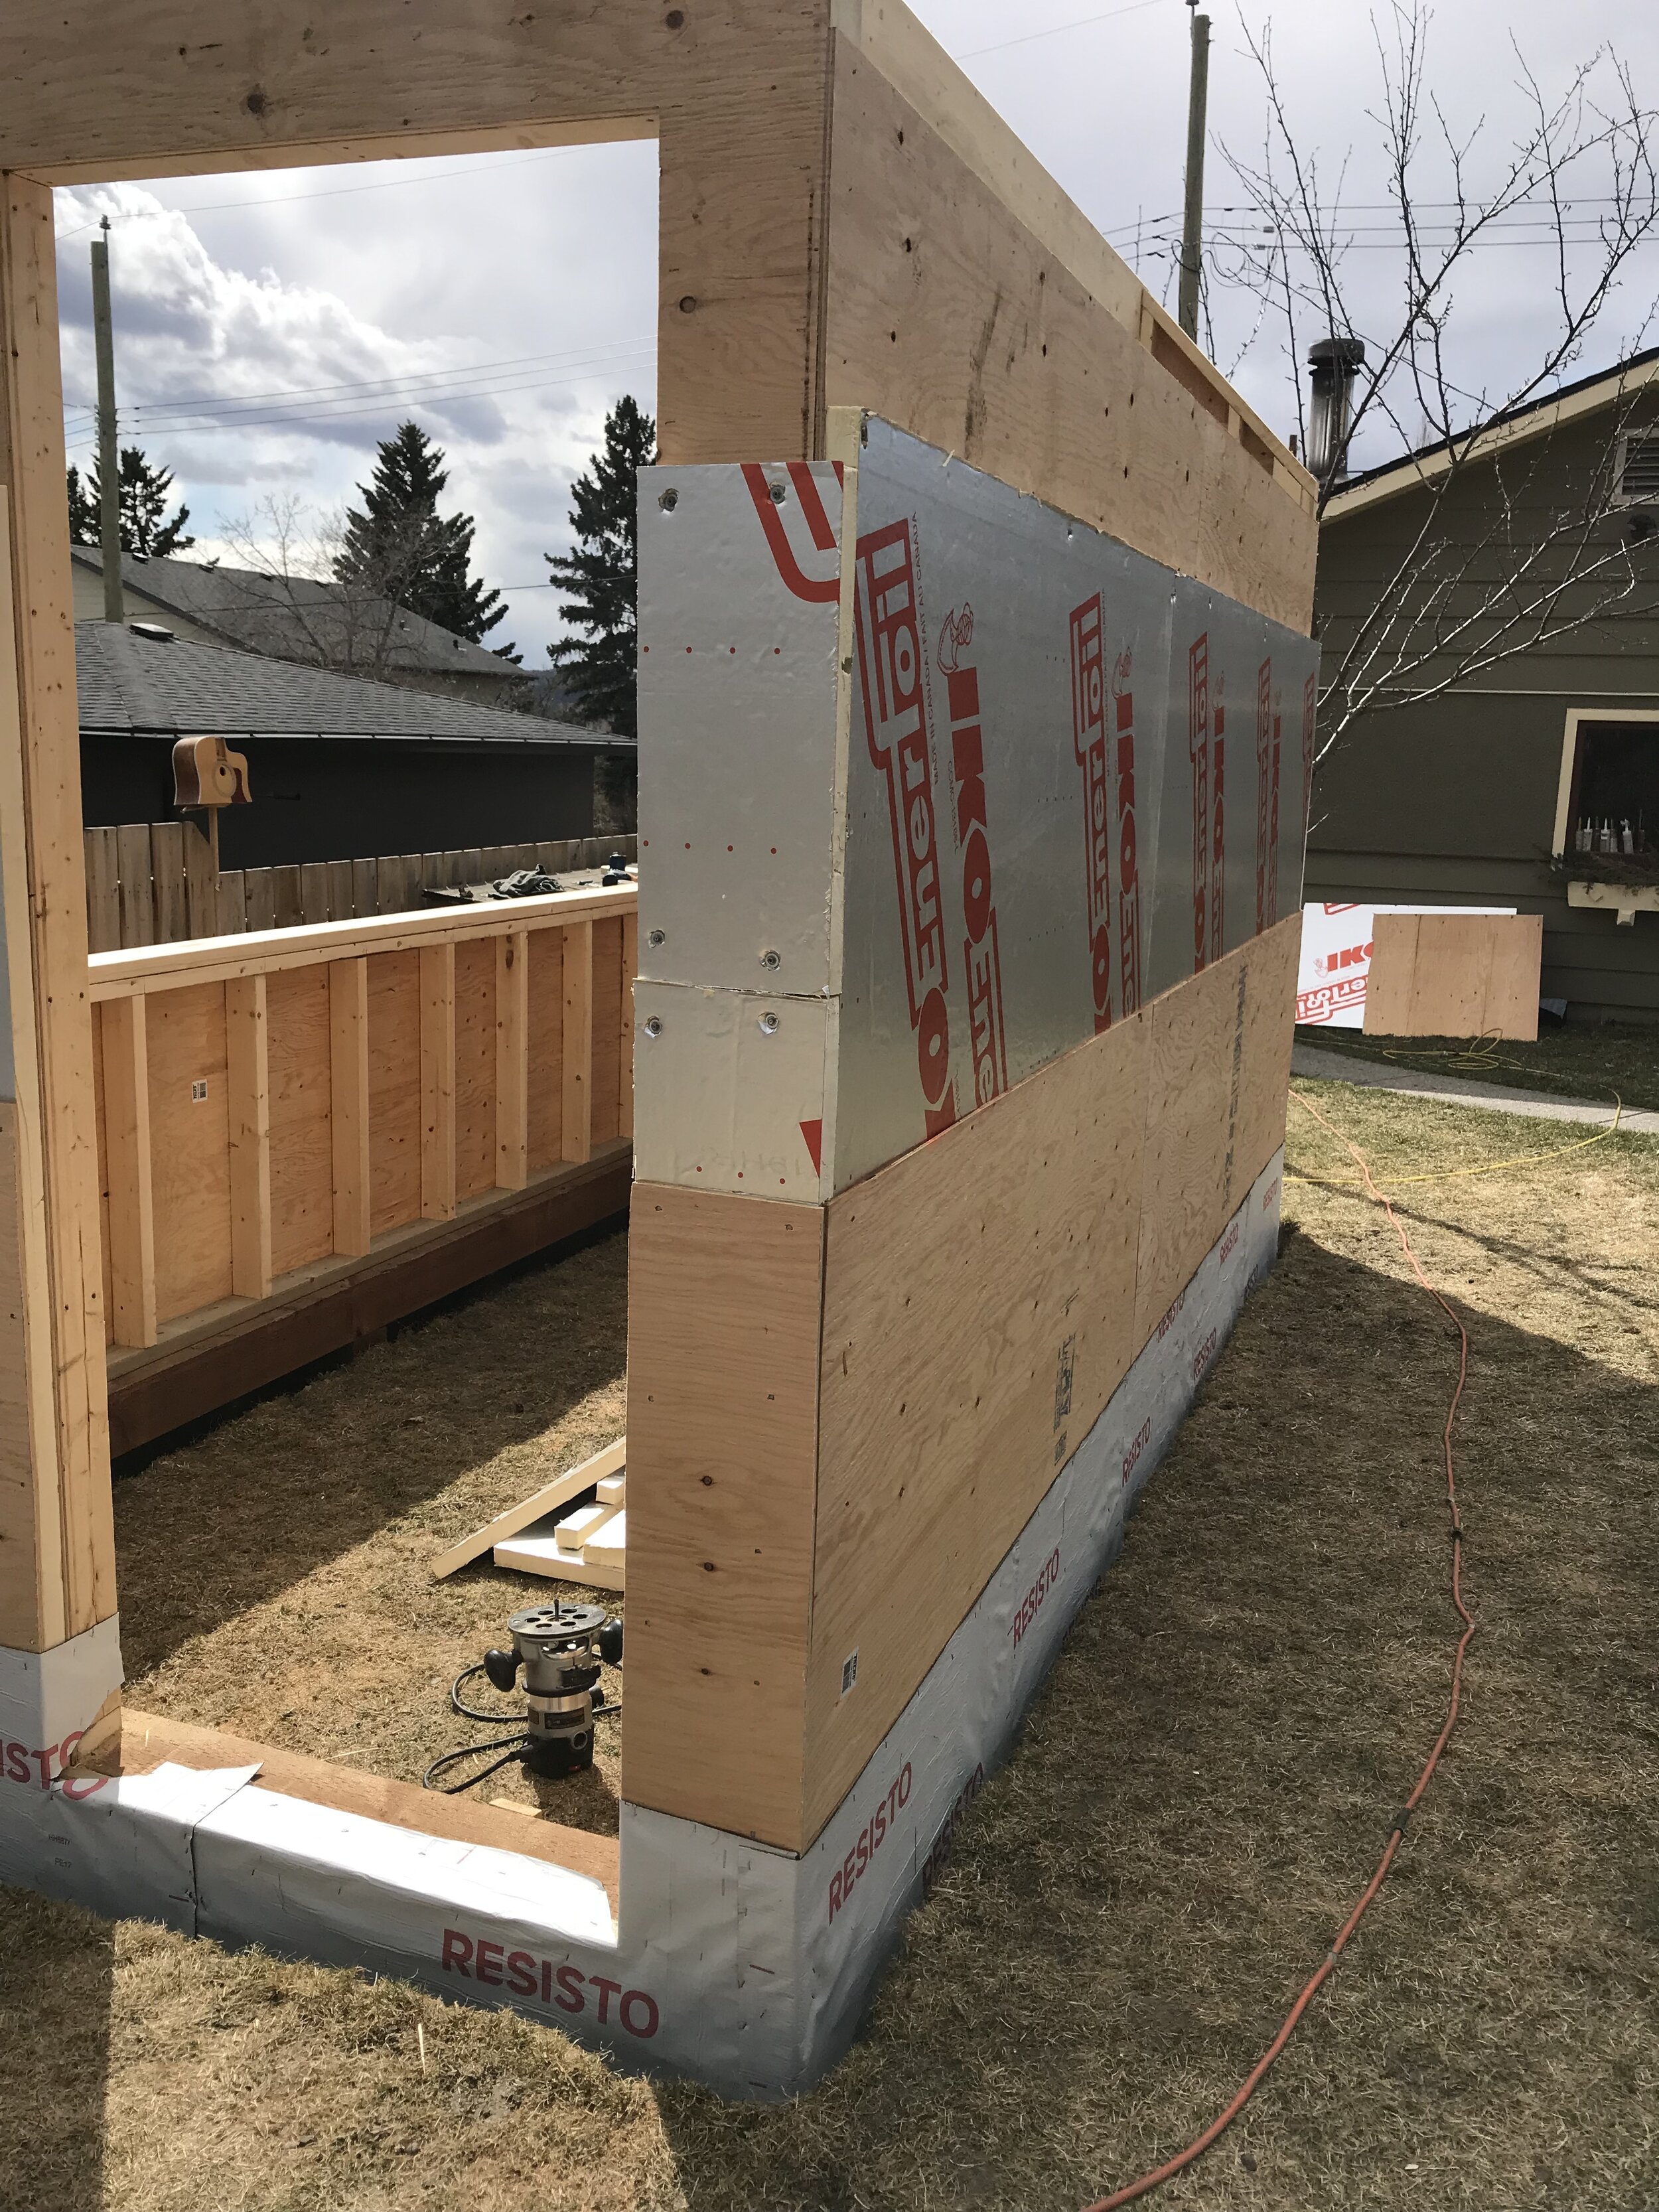 Exterior layers: plywood, insulation, plywood (+ foundation membrane)